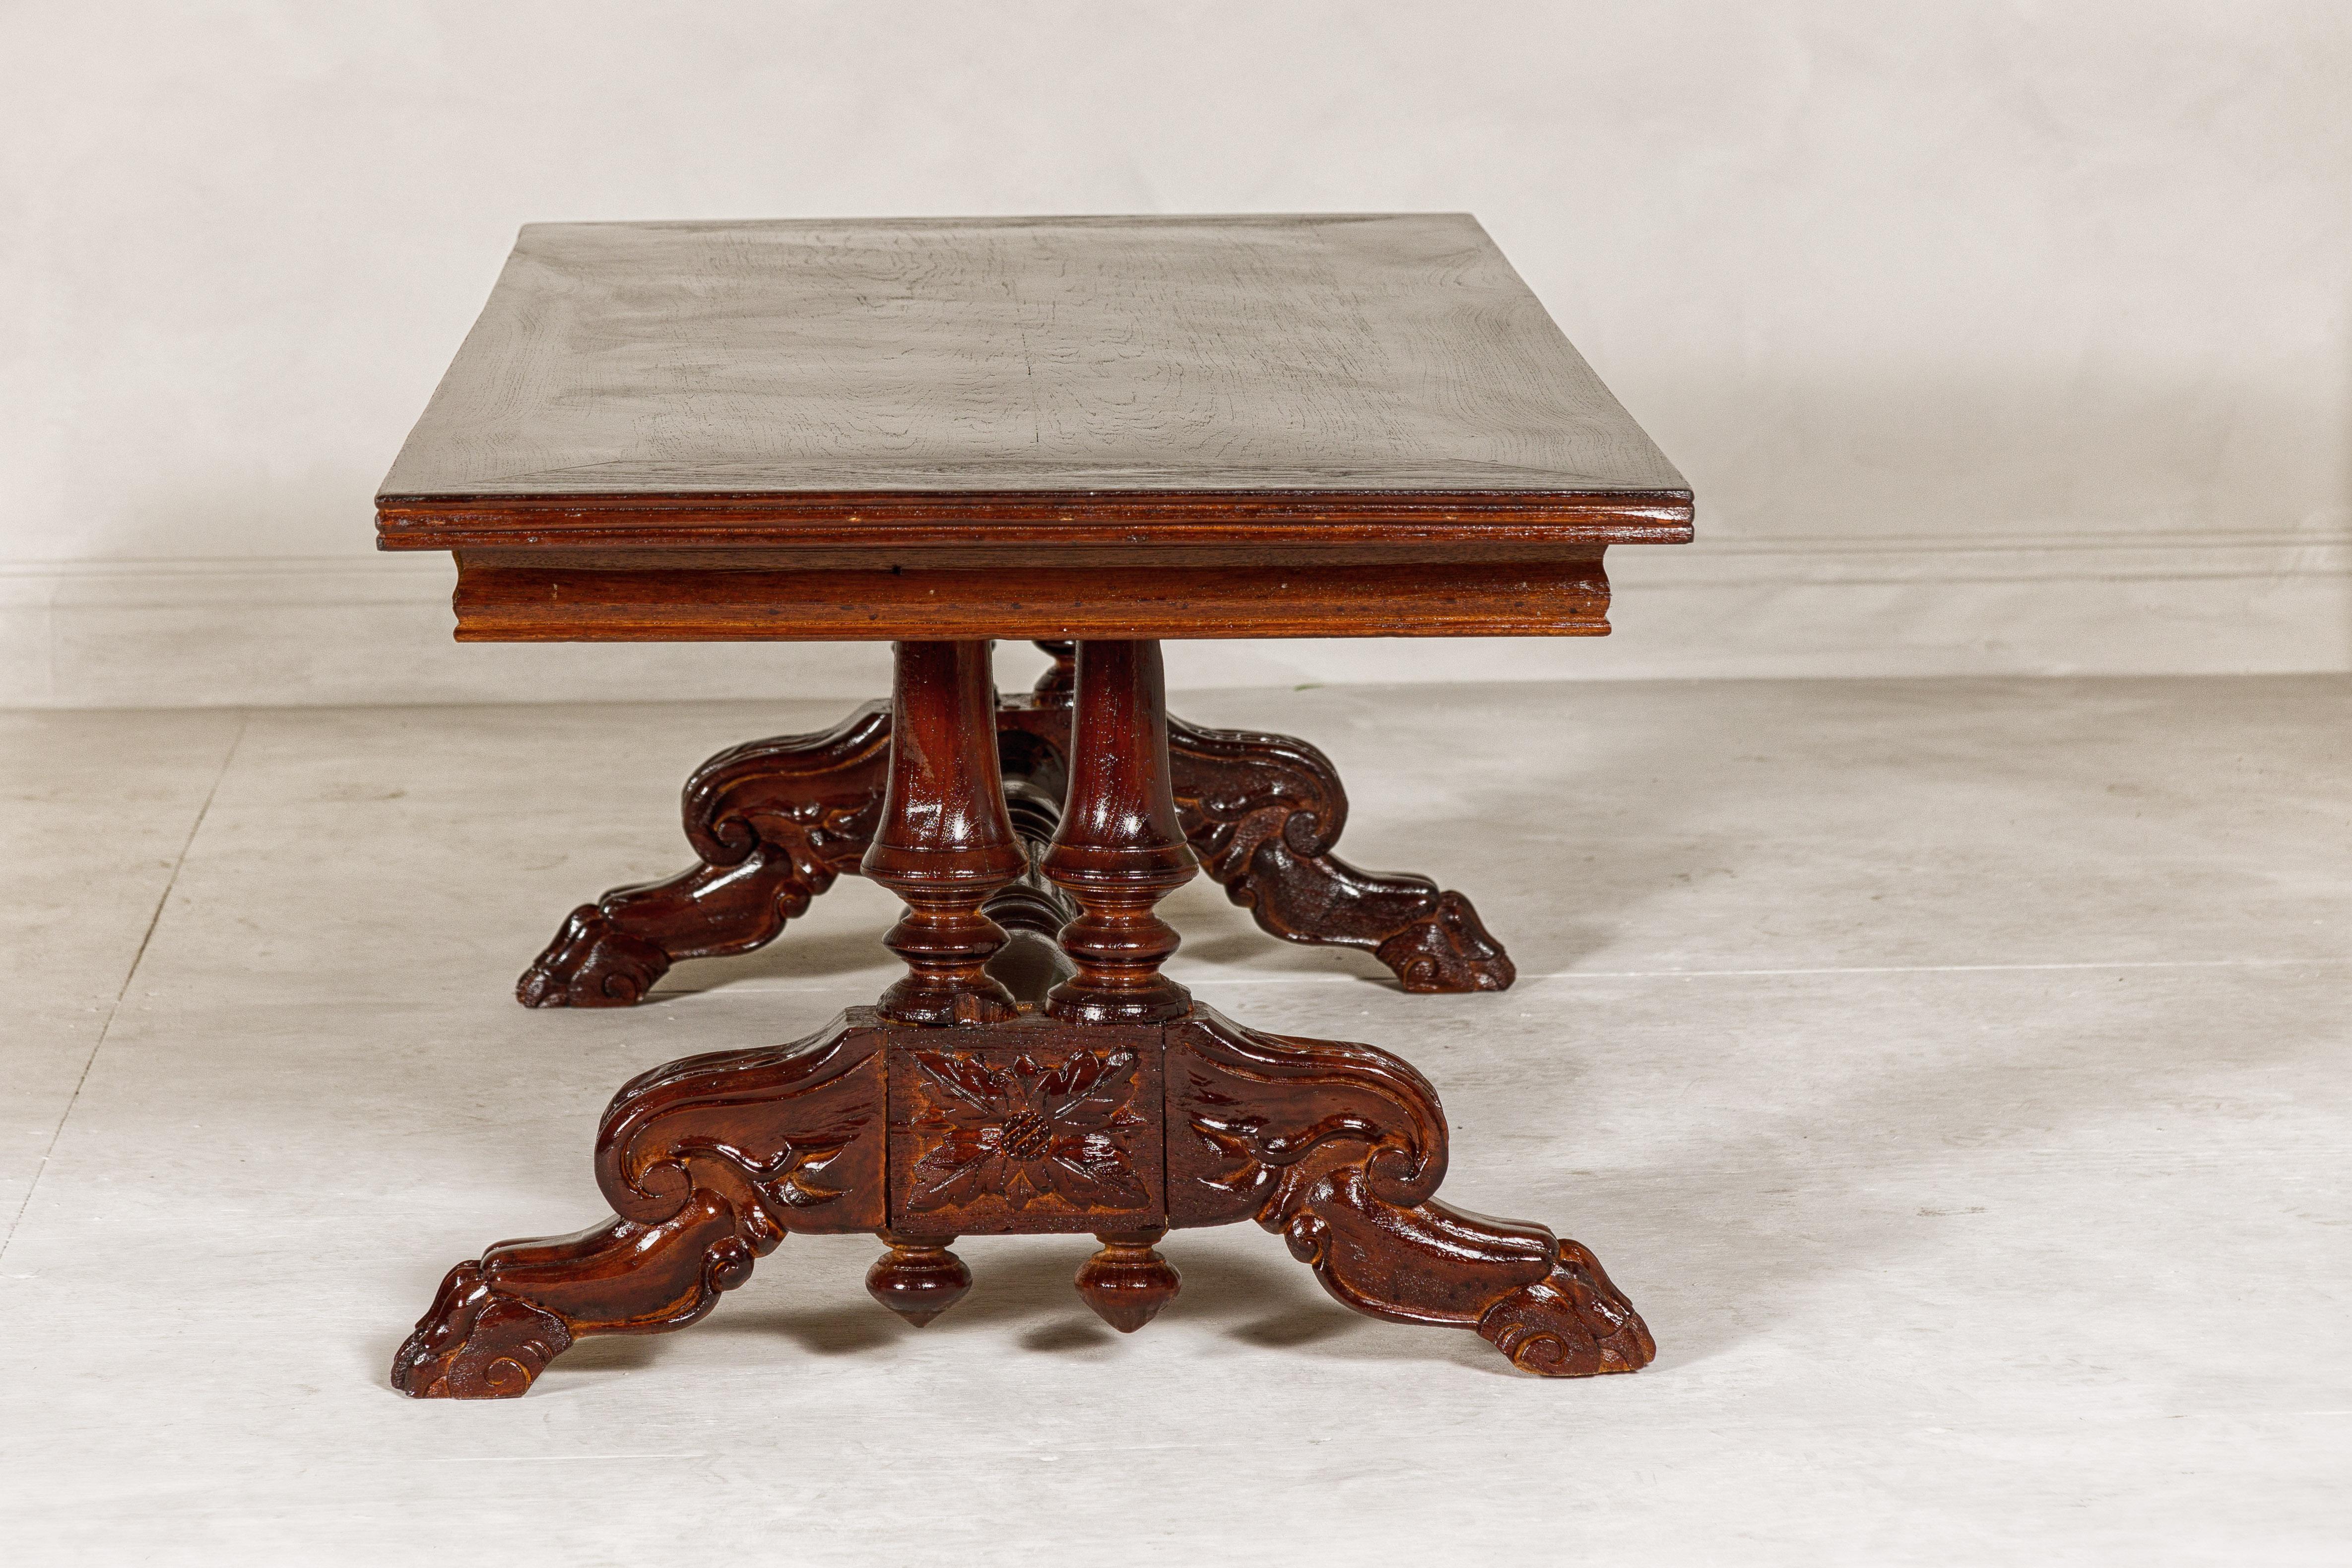 Dutch Colonial Ornate Coffee Table with Carved Lion Paw Legs and Cross Stretcher For Sale 6